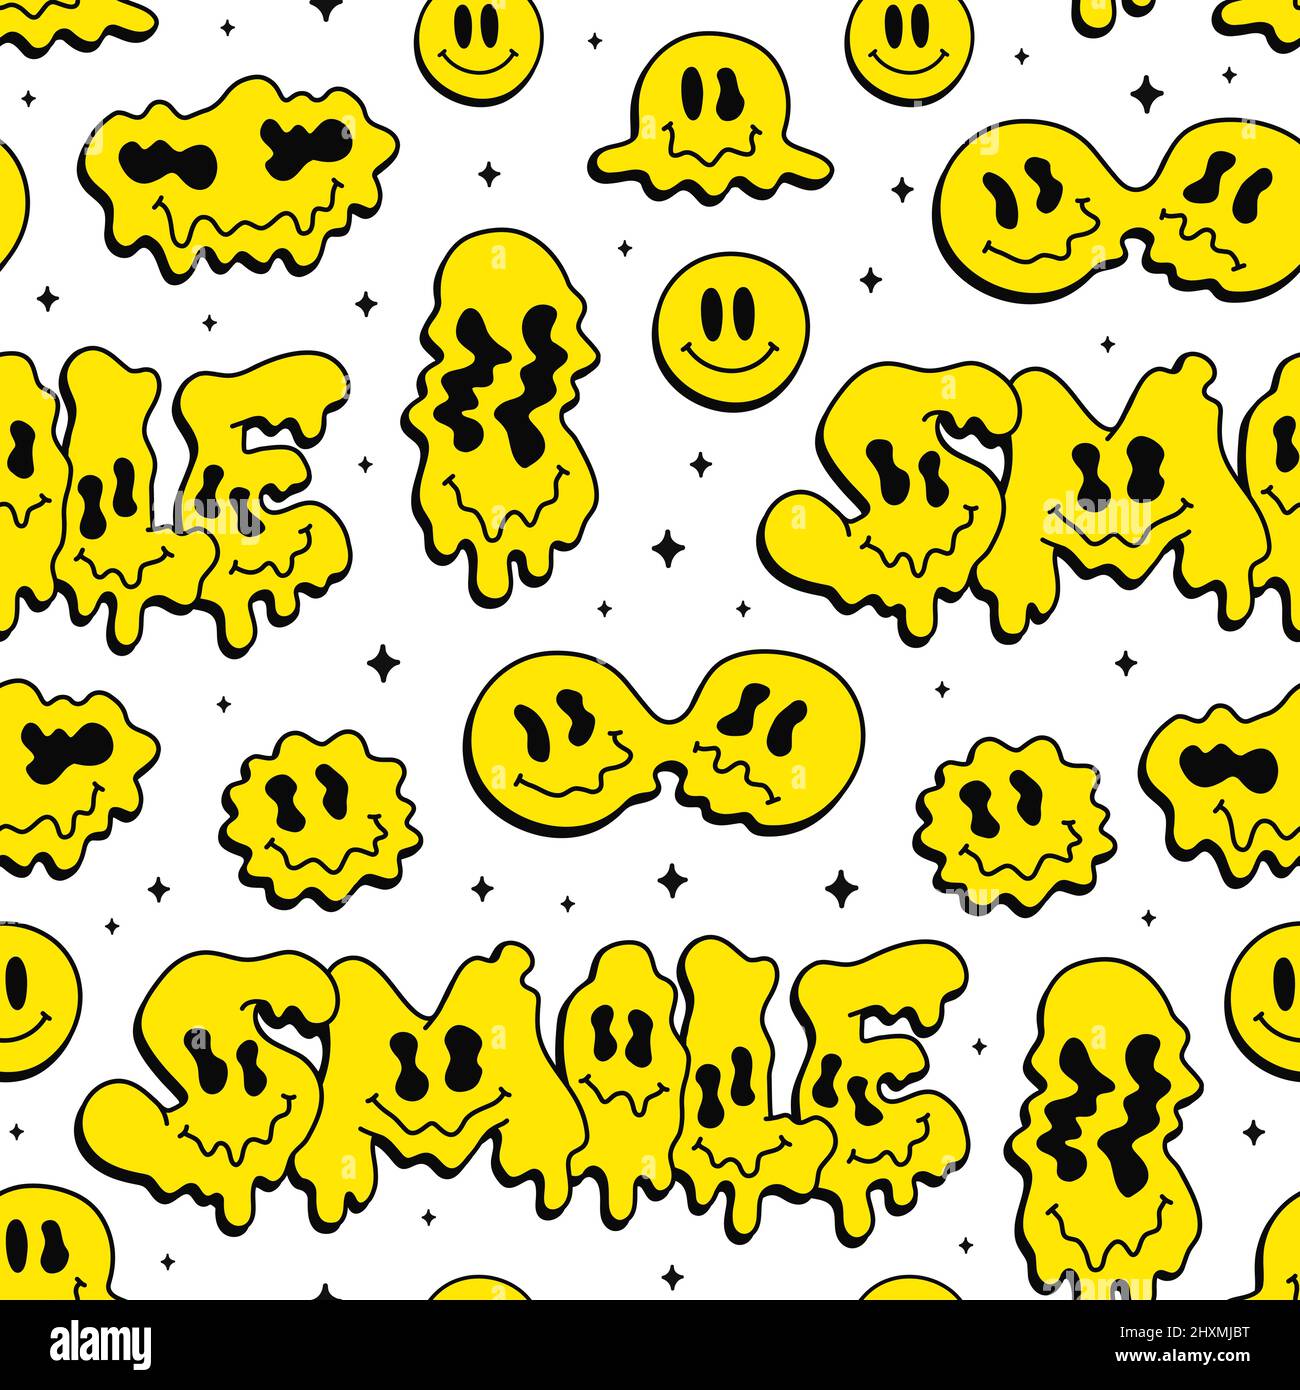 Funny melt warp smile faces,psychedelic emoji seamless pattern.Vector cool cartoon character illustration.Smile faces graphic,melt,acid,drugs,60s,70s,90s trippy seamless pattern wallpaper print art Stock Vector